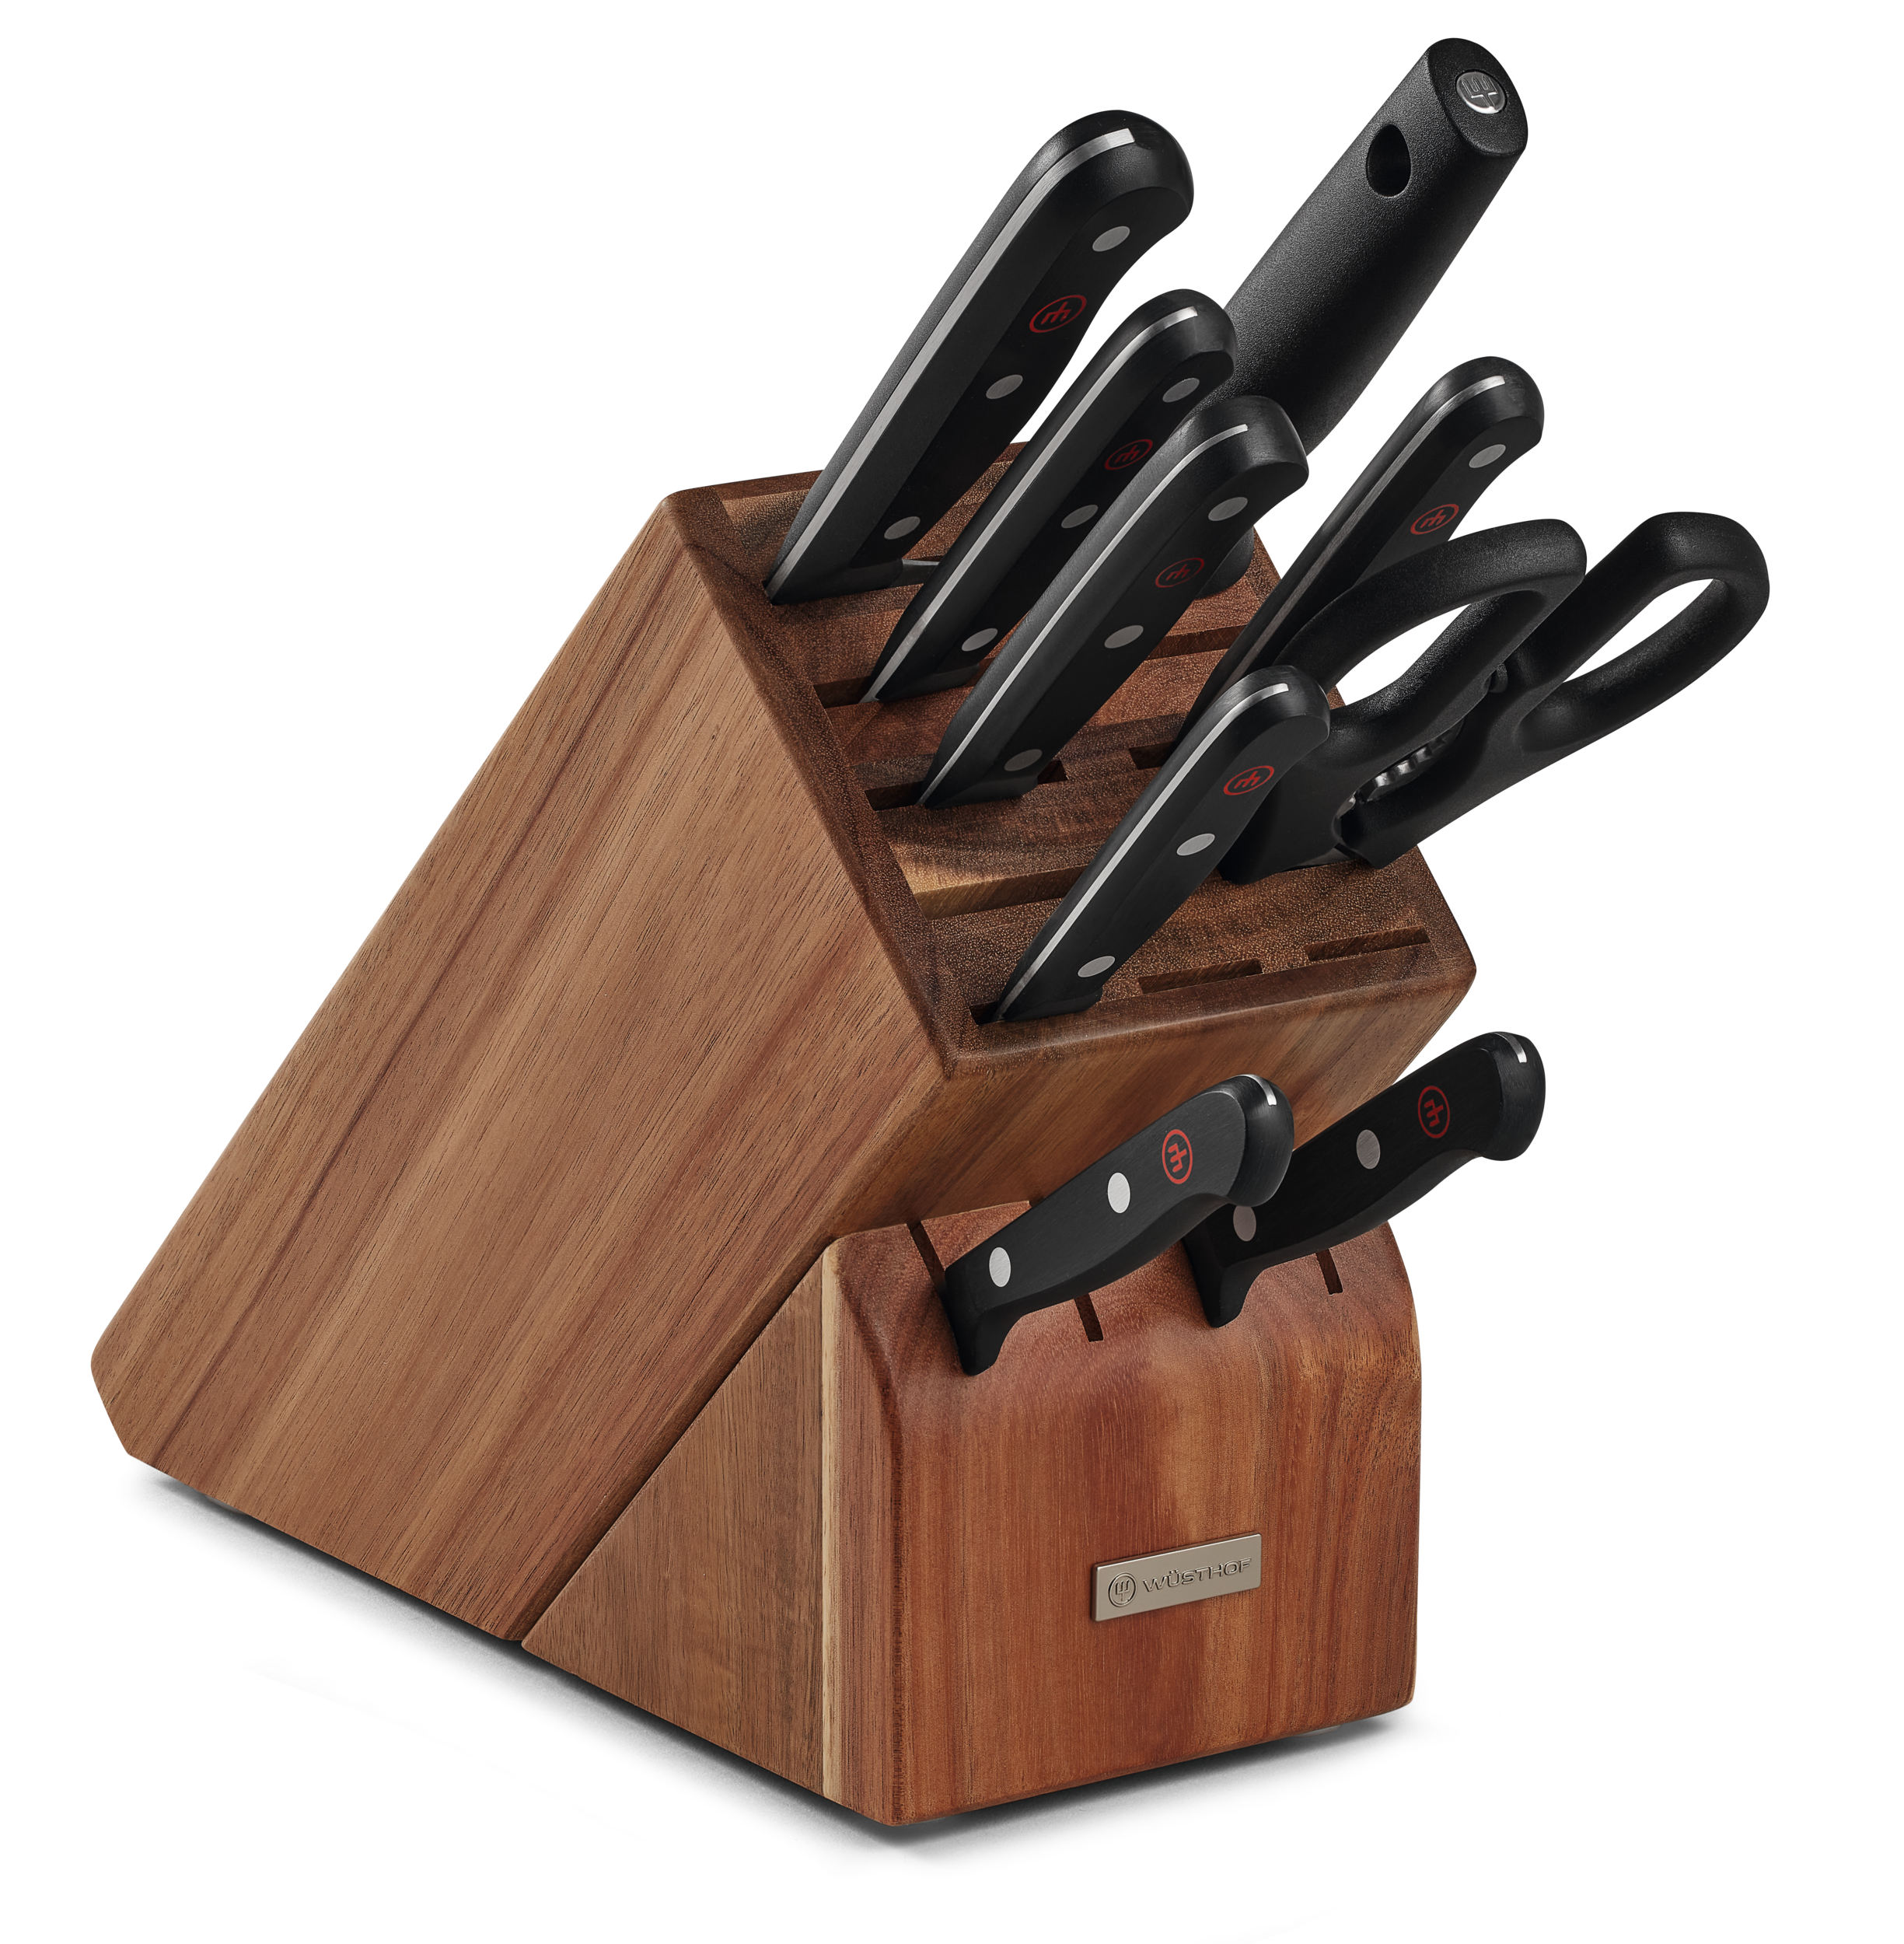 Wusthof Stainless Steel Gourmet 4 Piece Steak Knife Set with White Handles